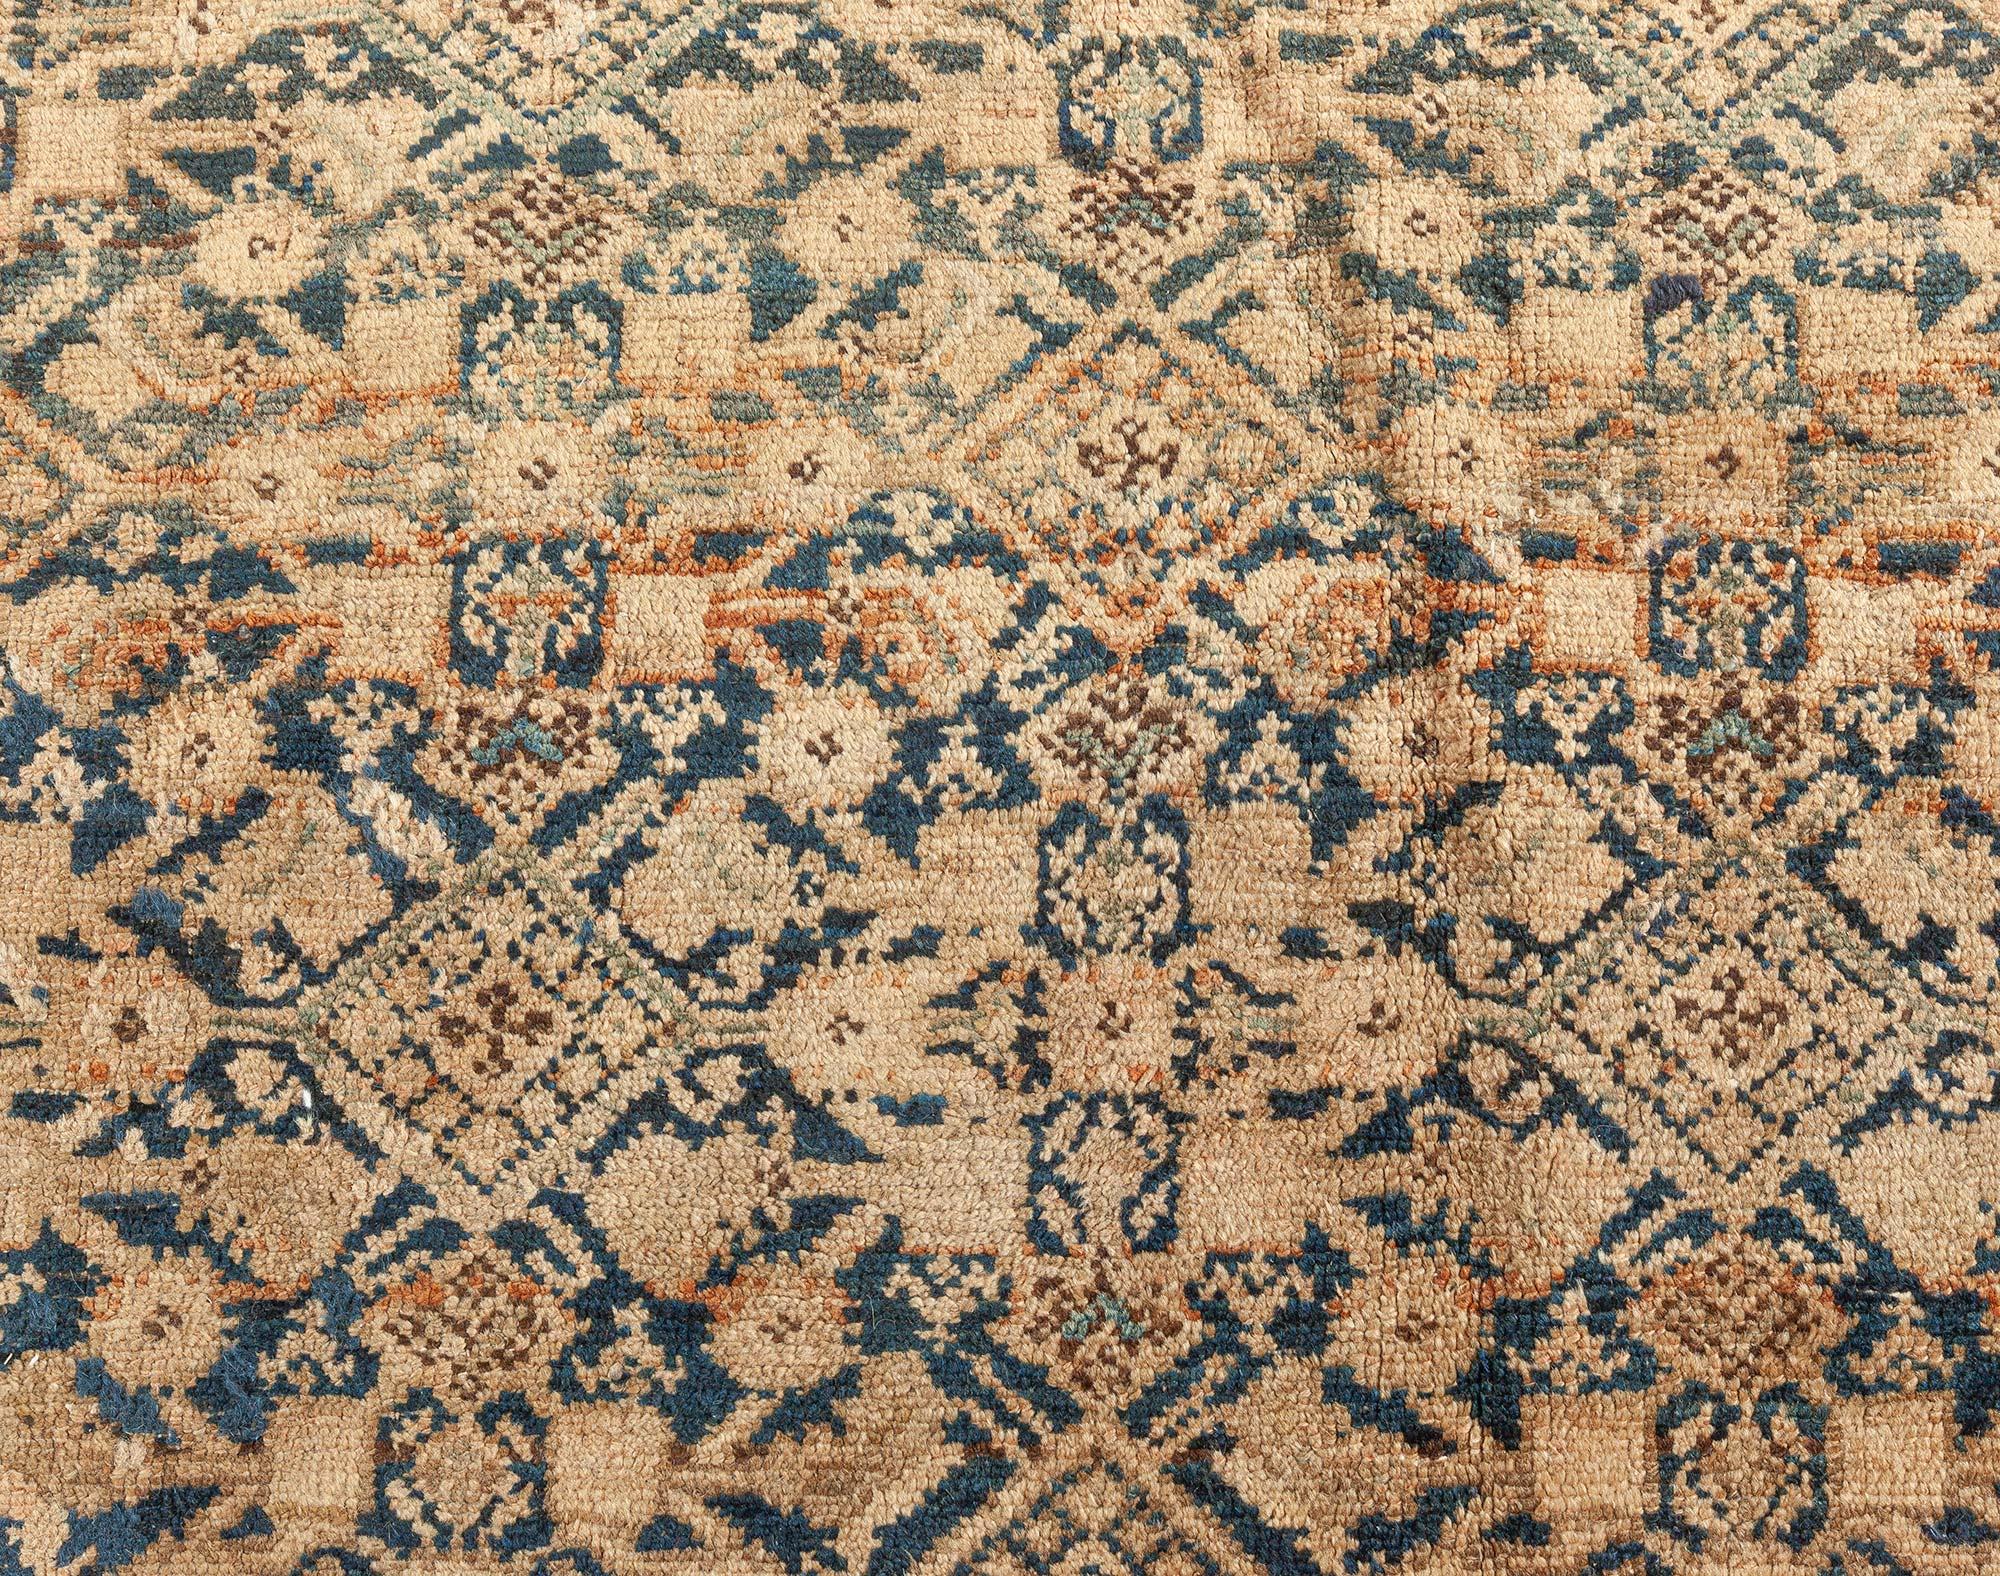 Antique Persian Malayer Fragment
Size: 7'4